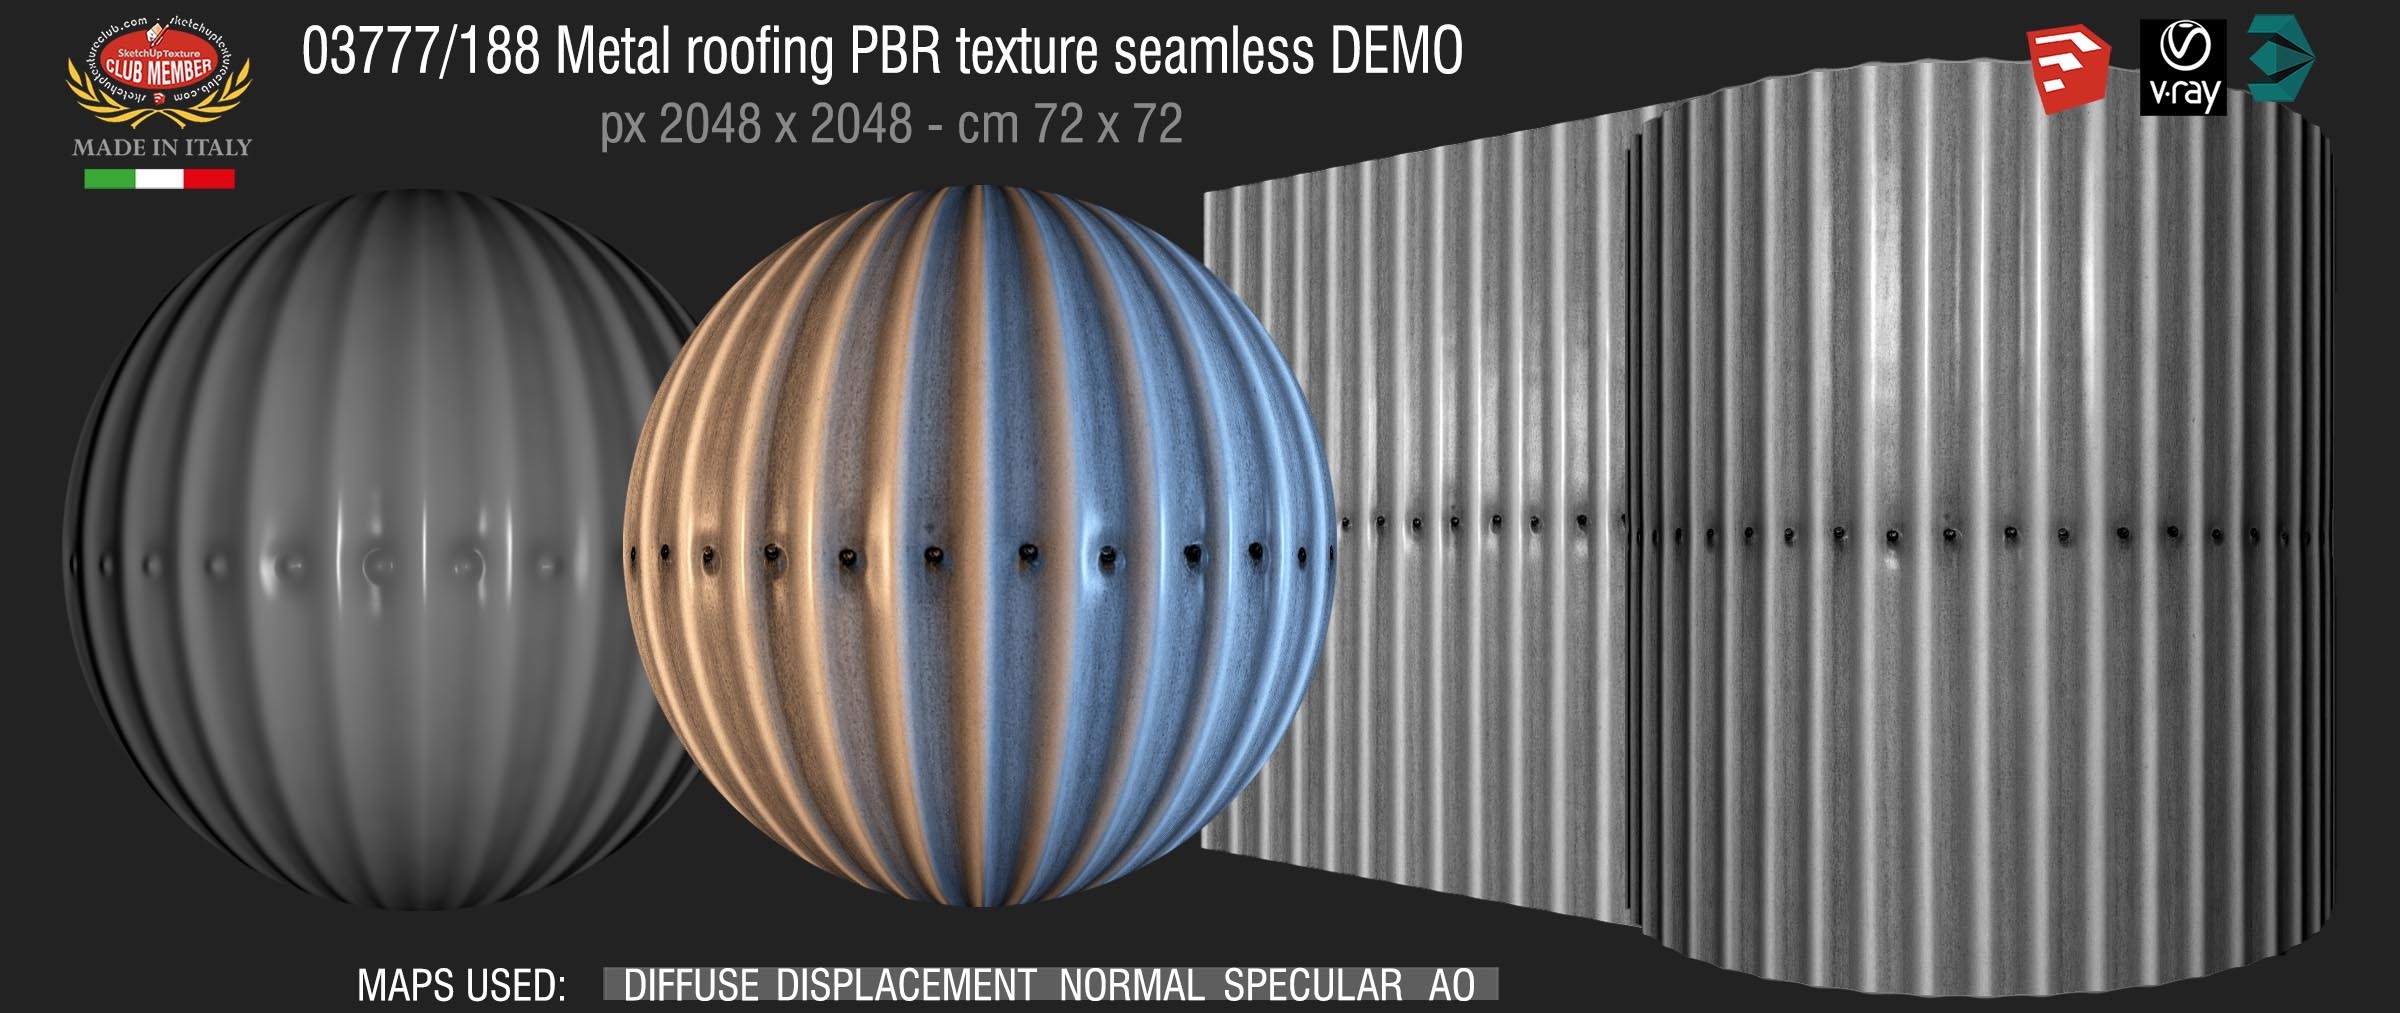 03777_188 Metal roofing PBR texture seamless DEMO